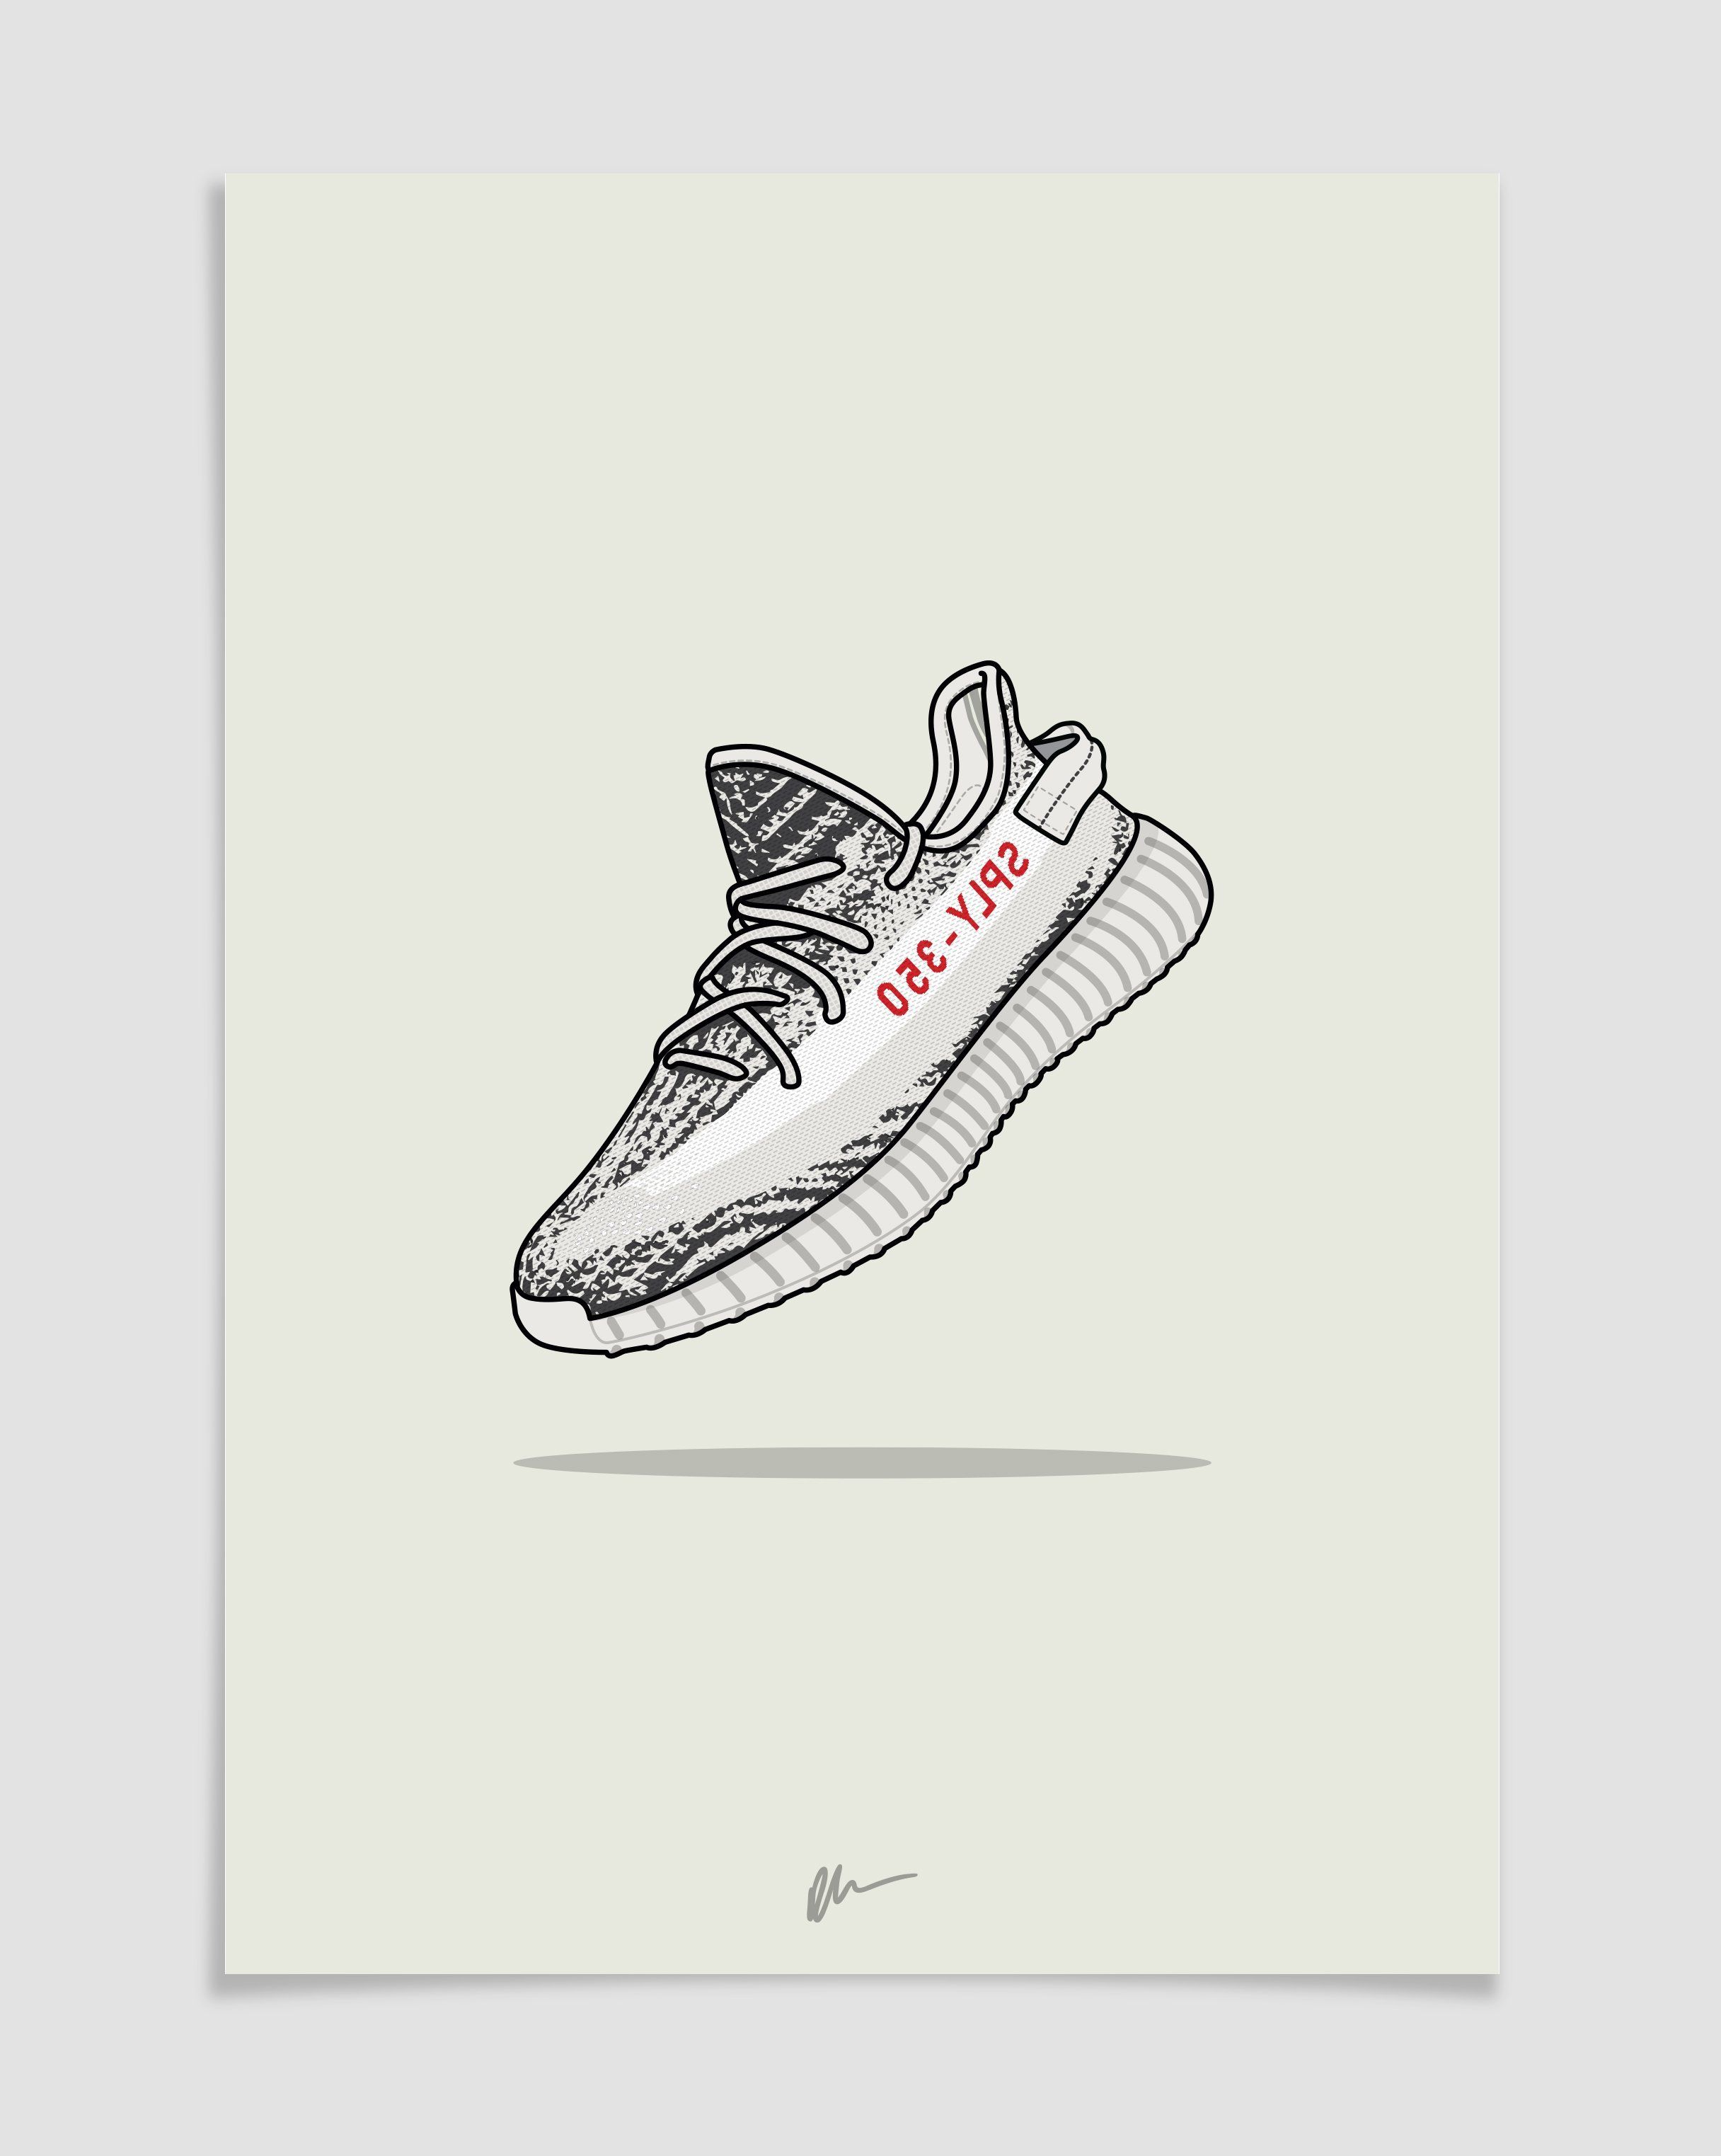 Originally created Yeezy 350 v2 Zebra CP9654 illustration.The ideal for the home or office, ideal for sneakerhea. Sneakers wallpaper, Yeezy, Sneakers illustration